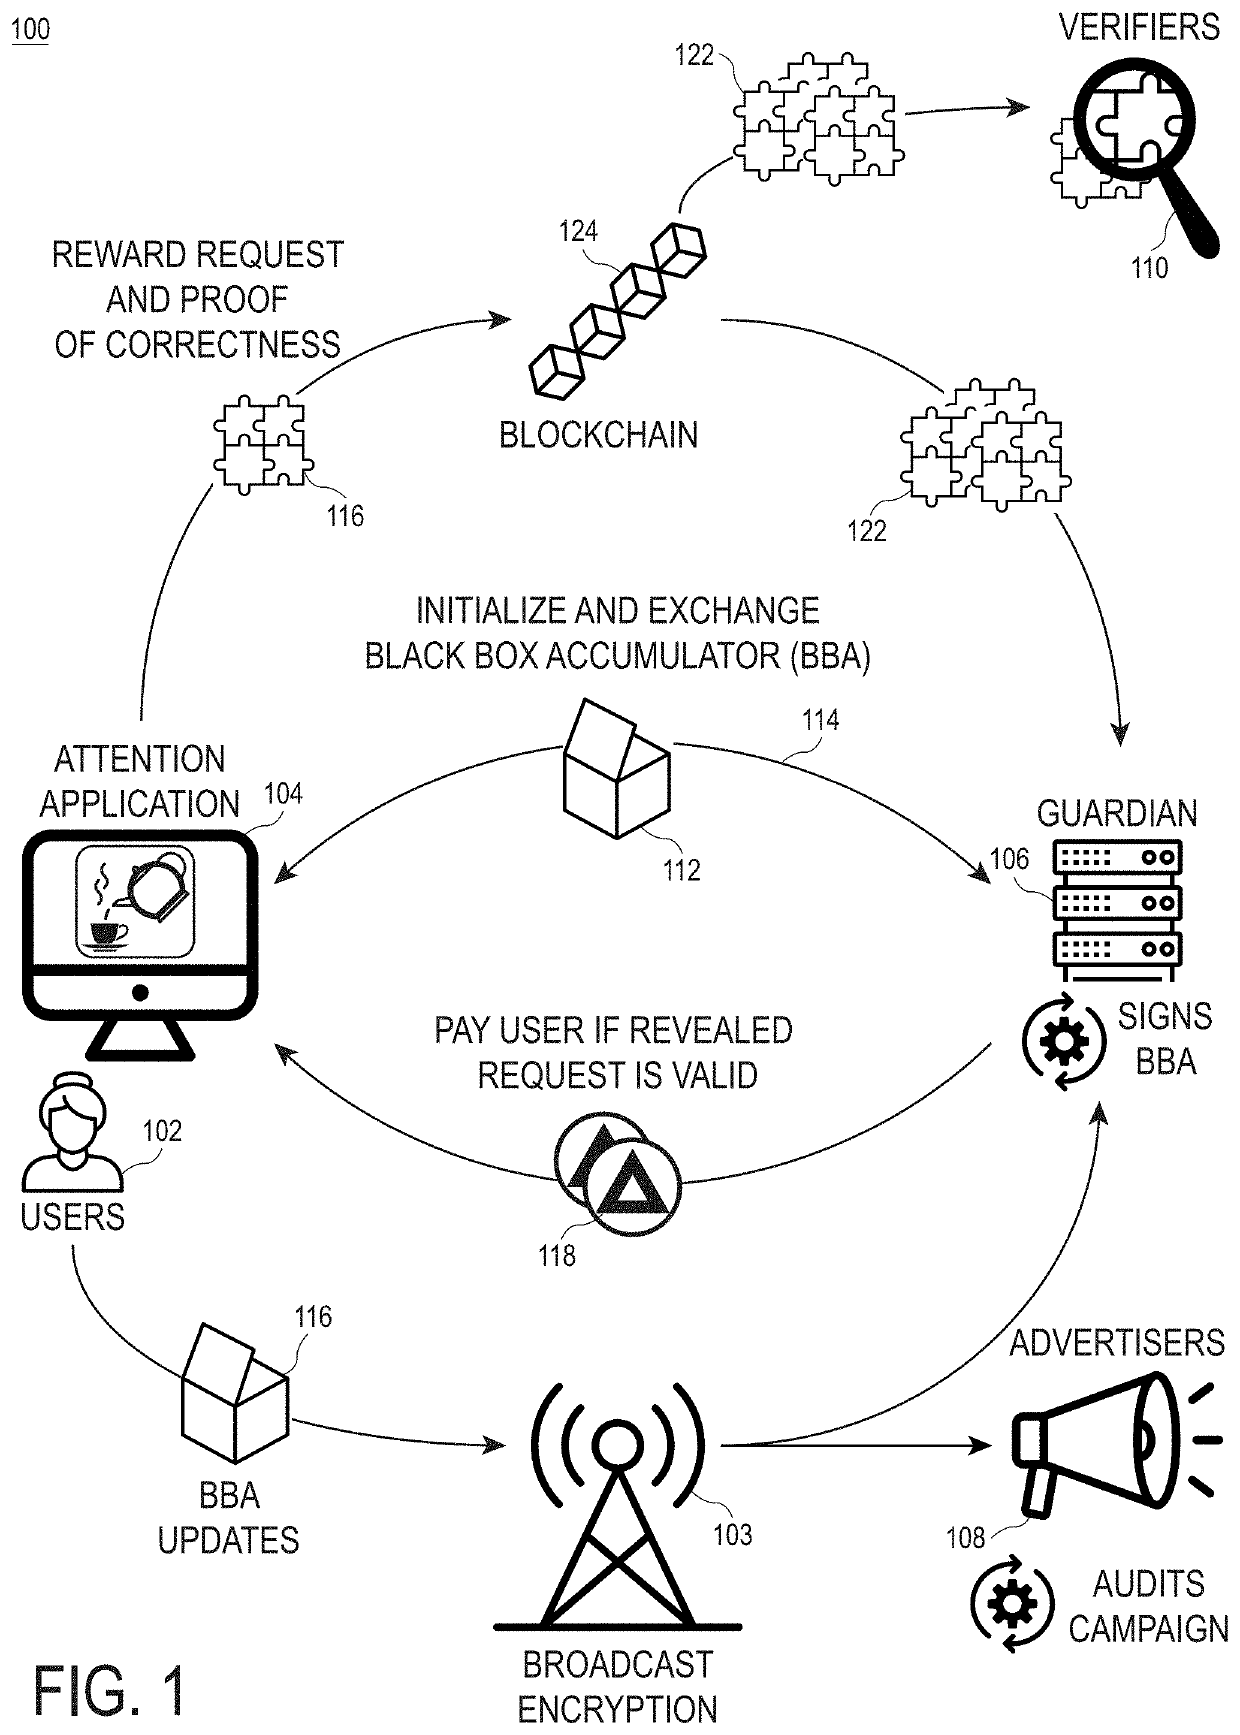 Decentralized privacy-preserving rewards with cryptographic black box accumulators